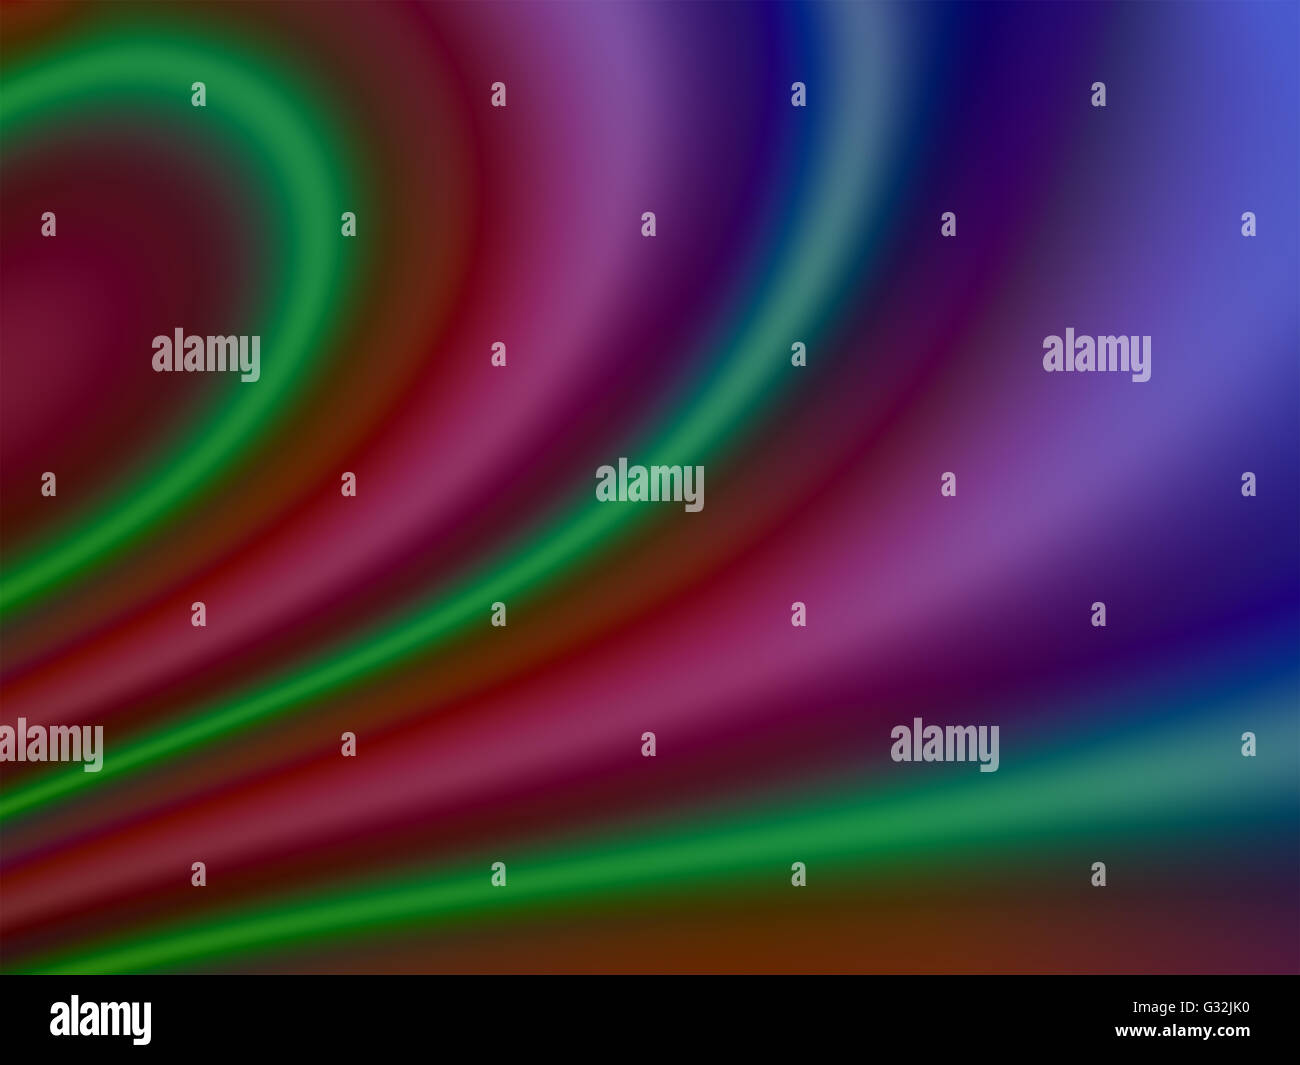 Beautiful fractal image with colorful sweeping lines resembling Northern Lights Stock Photo